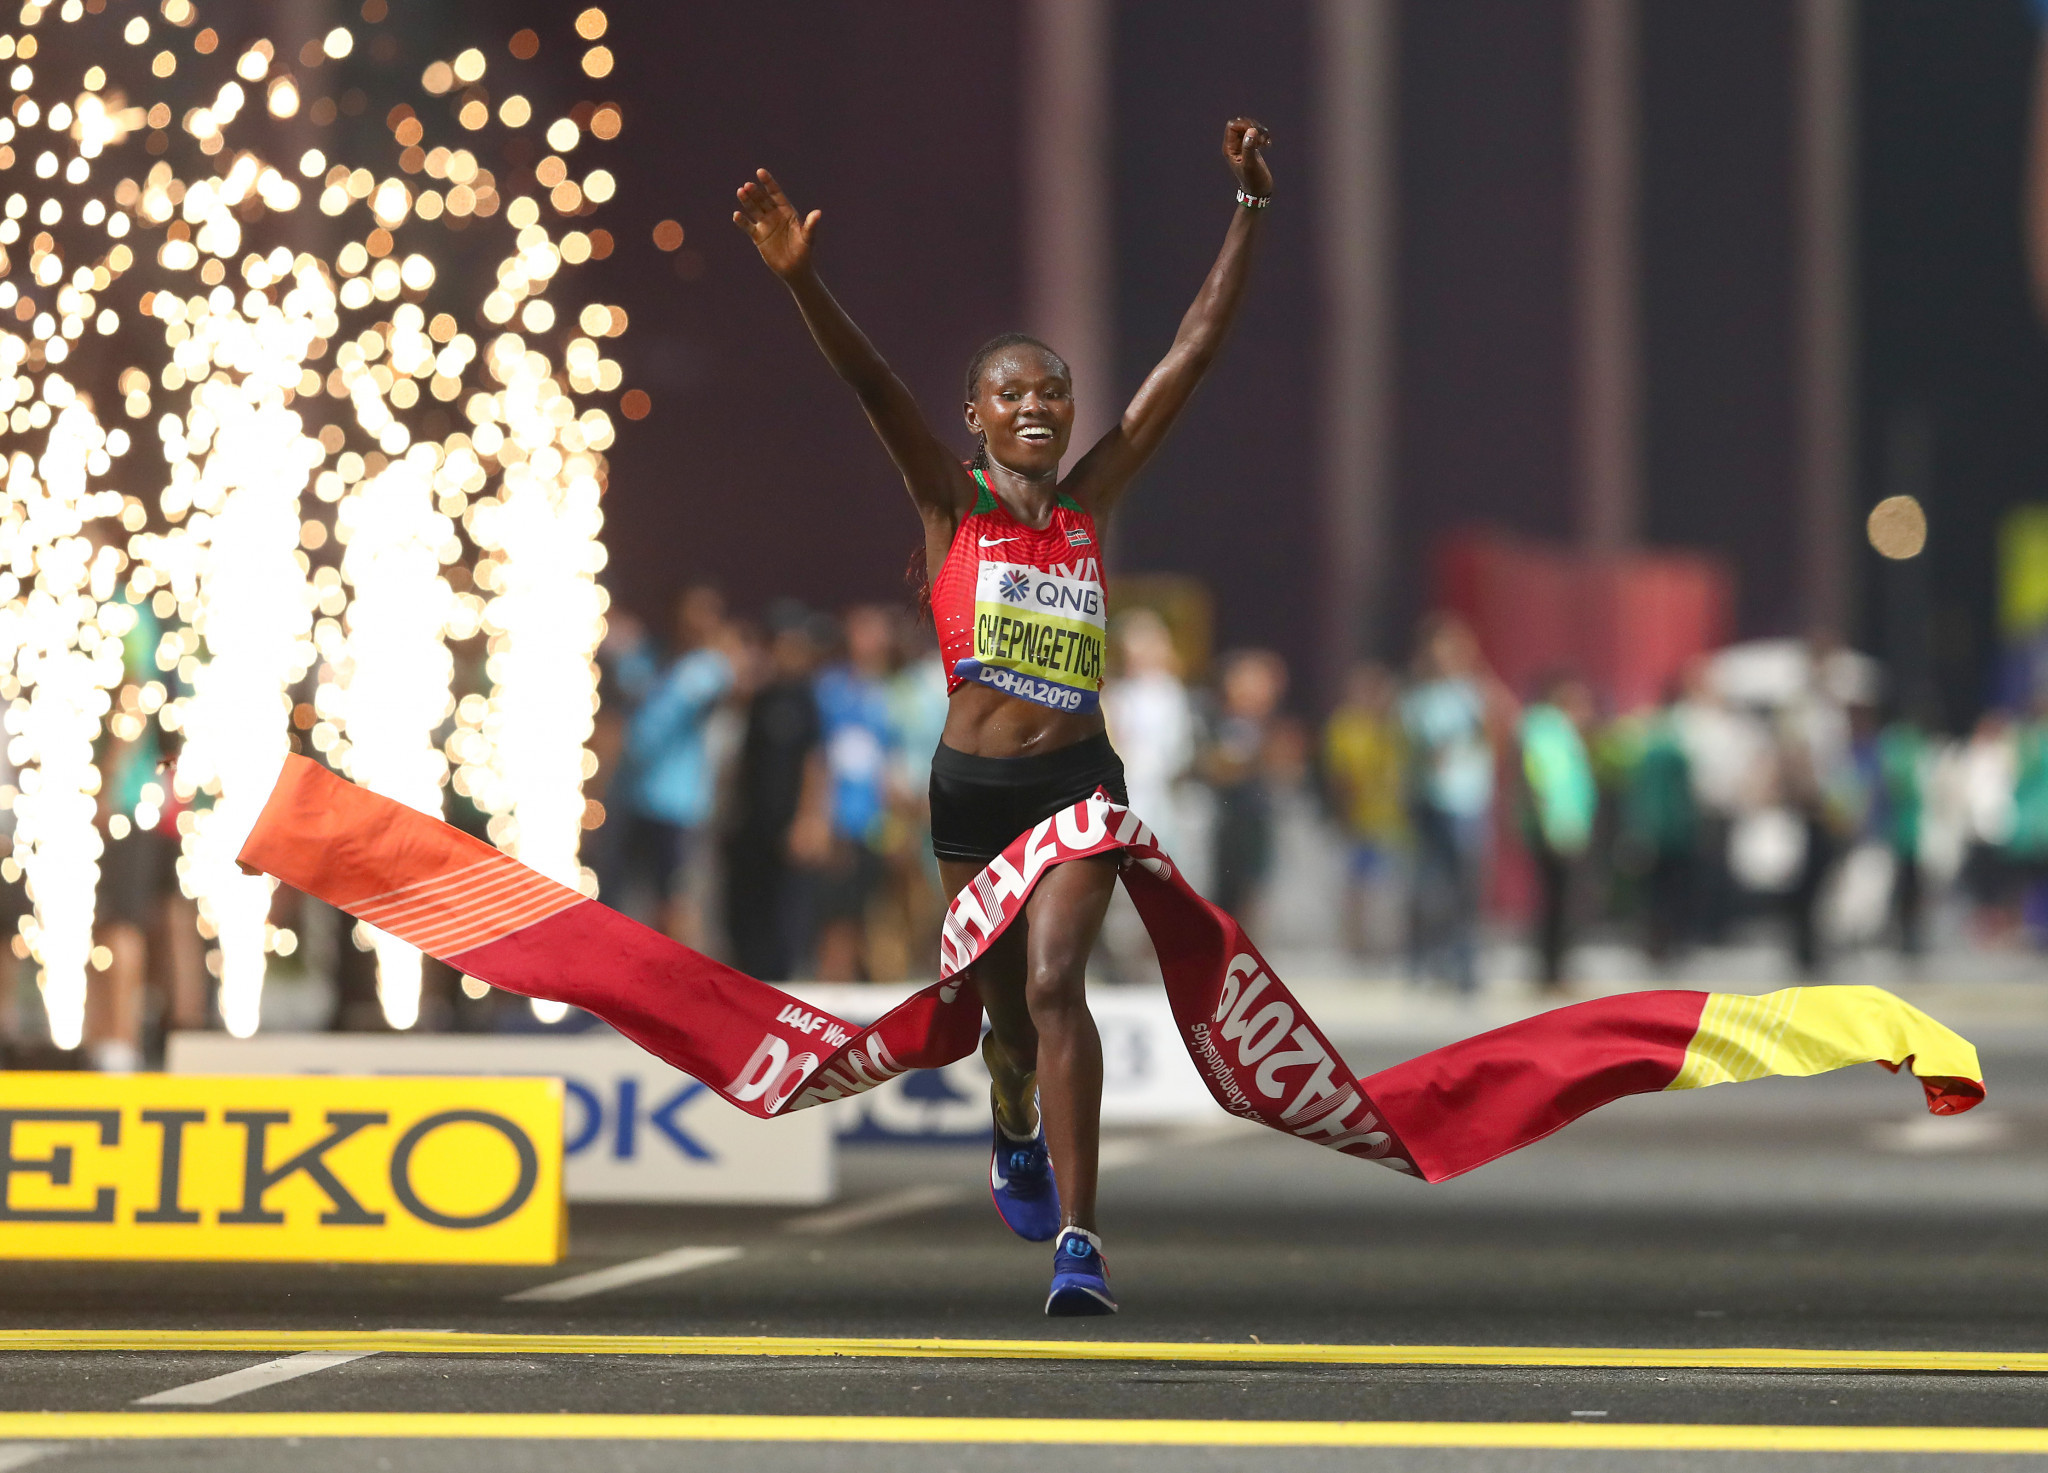 Gold for Chepngetich in Doha as 28 drop out of women's marathon due to stifling heat